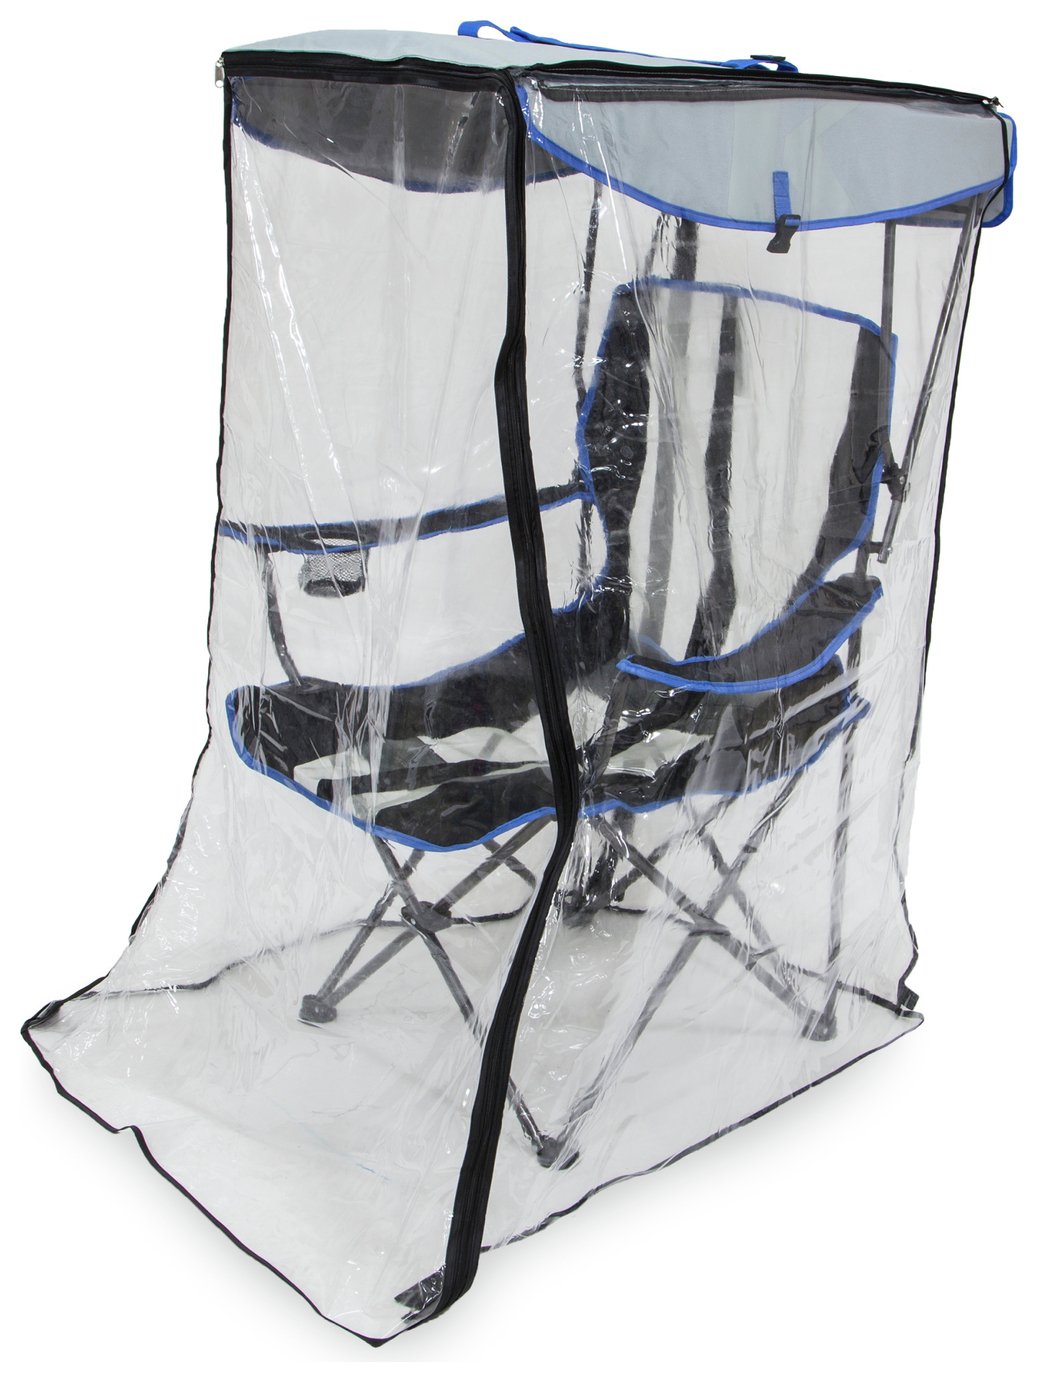 Kelsyus Camping Canopy Chair with Rain Cover